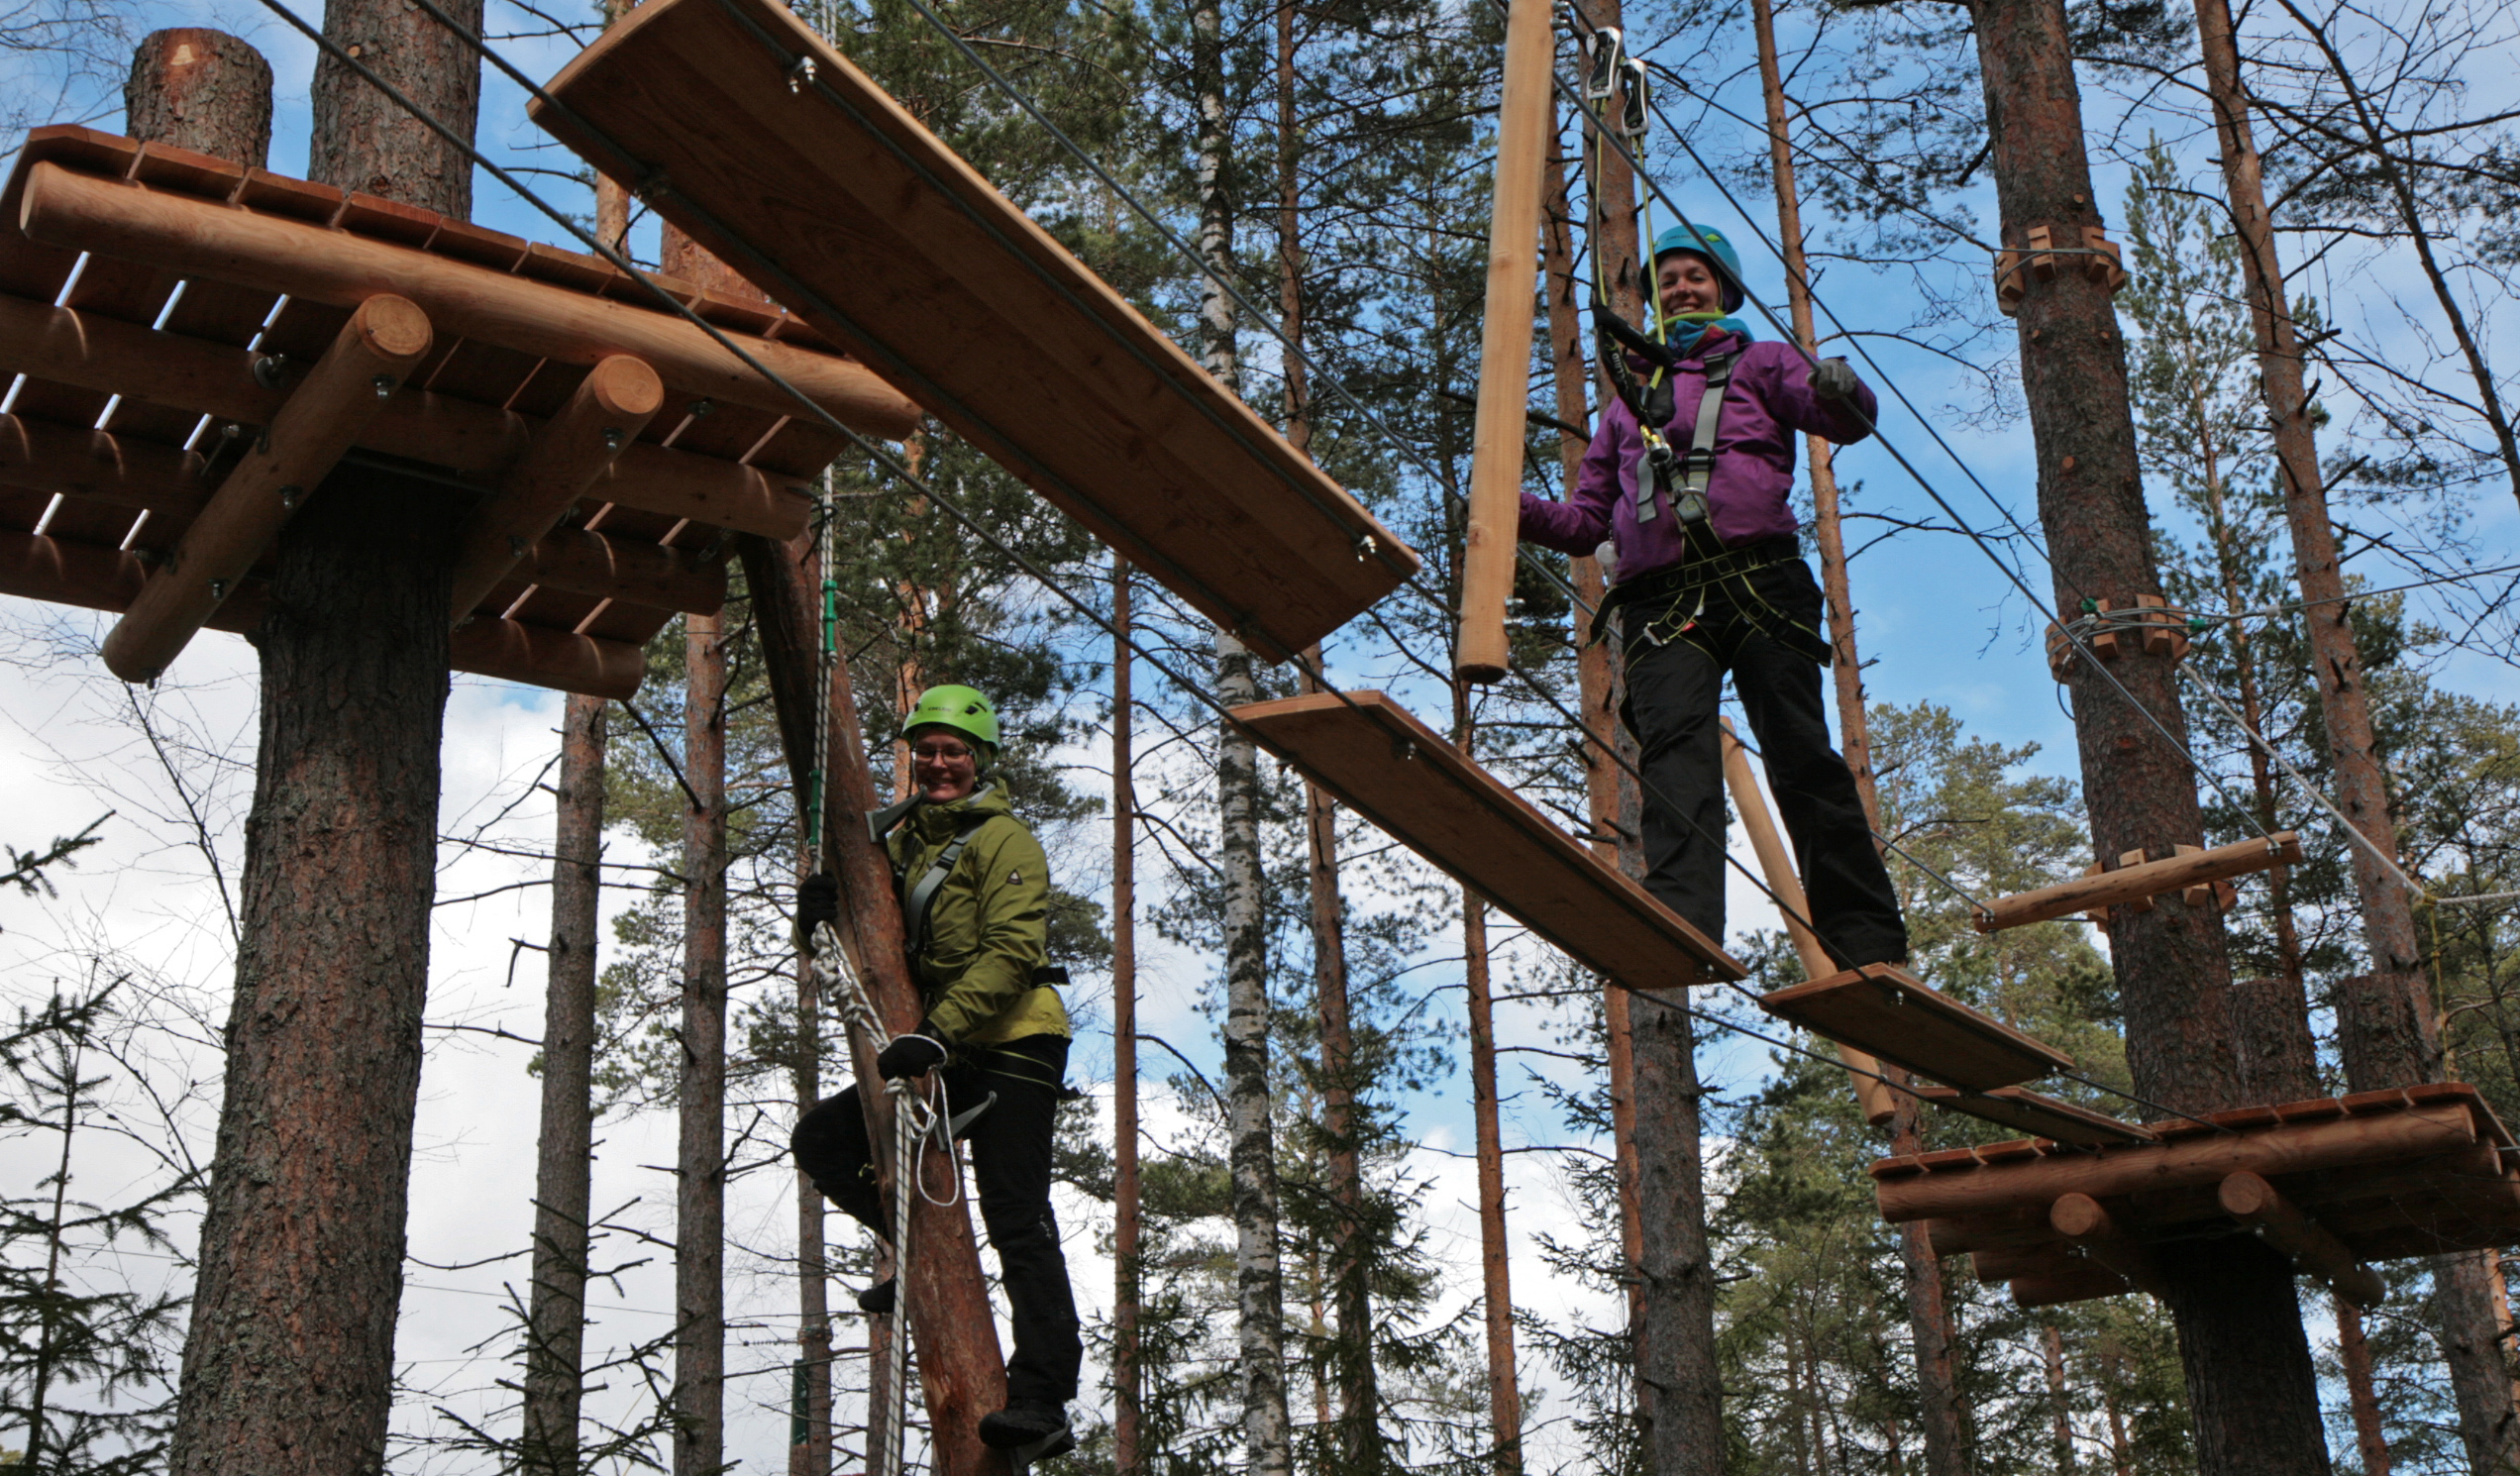 Anne Oksanen and Suvi Inkinen show how to do it. Before climbing, every customer is taught how to use the safety harness. Photo: Anna Kauppi